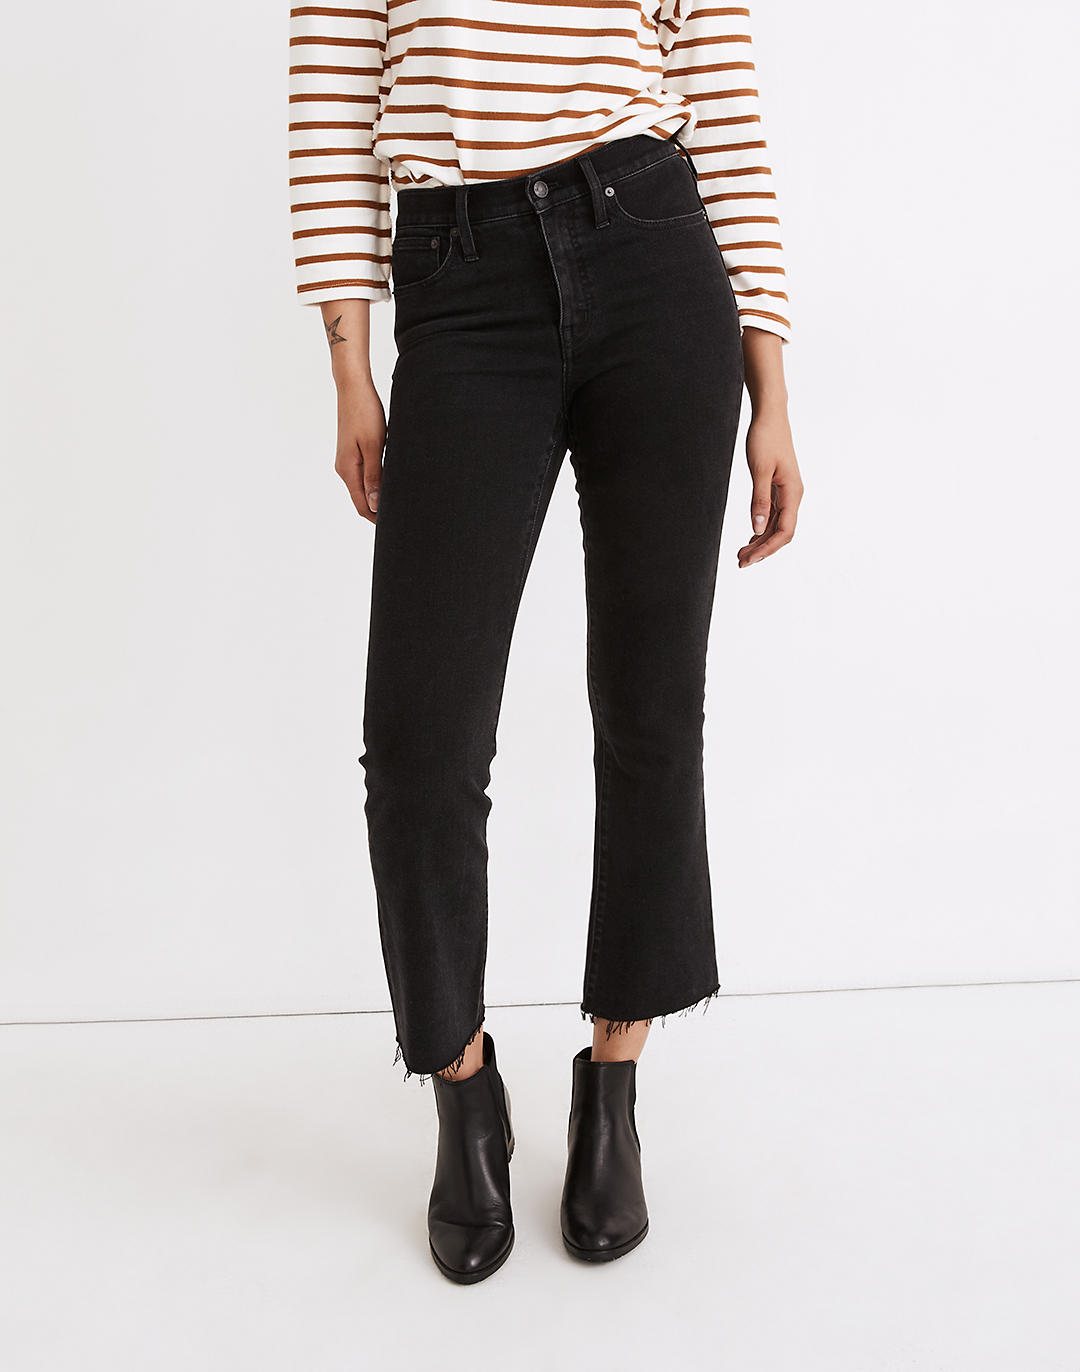 Cali Demi-Boot Jeans in Edmunds Wash: Raw-Hem Edition